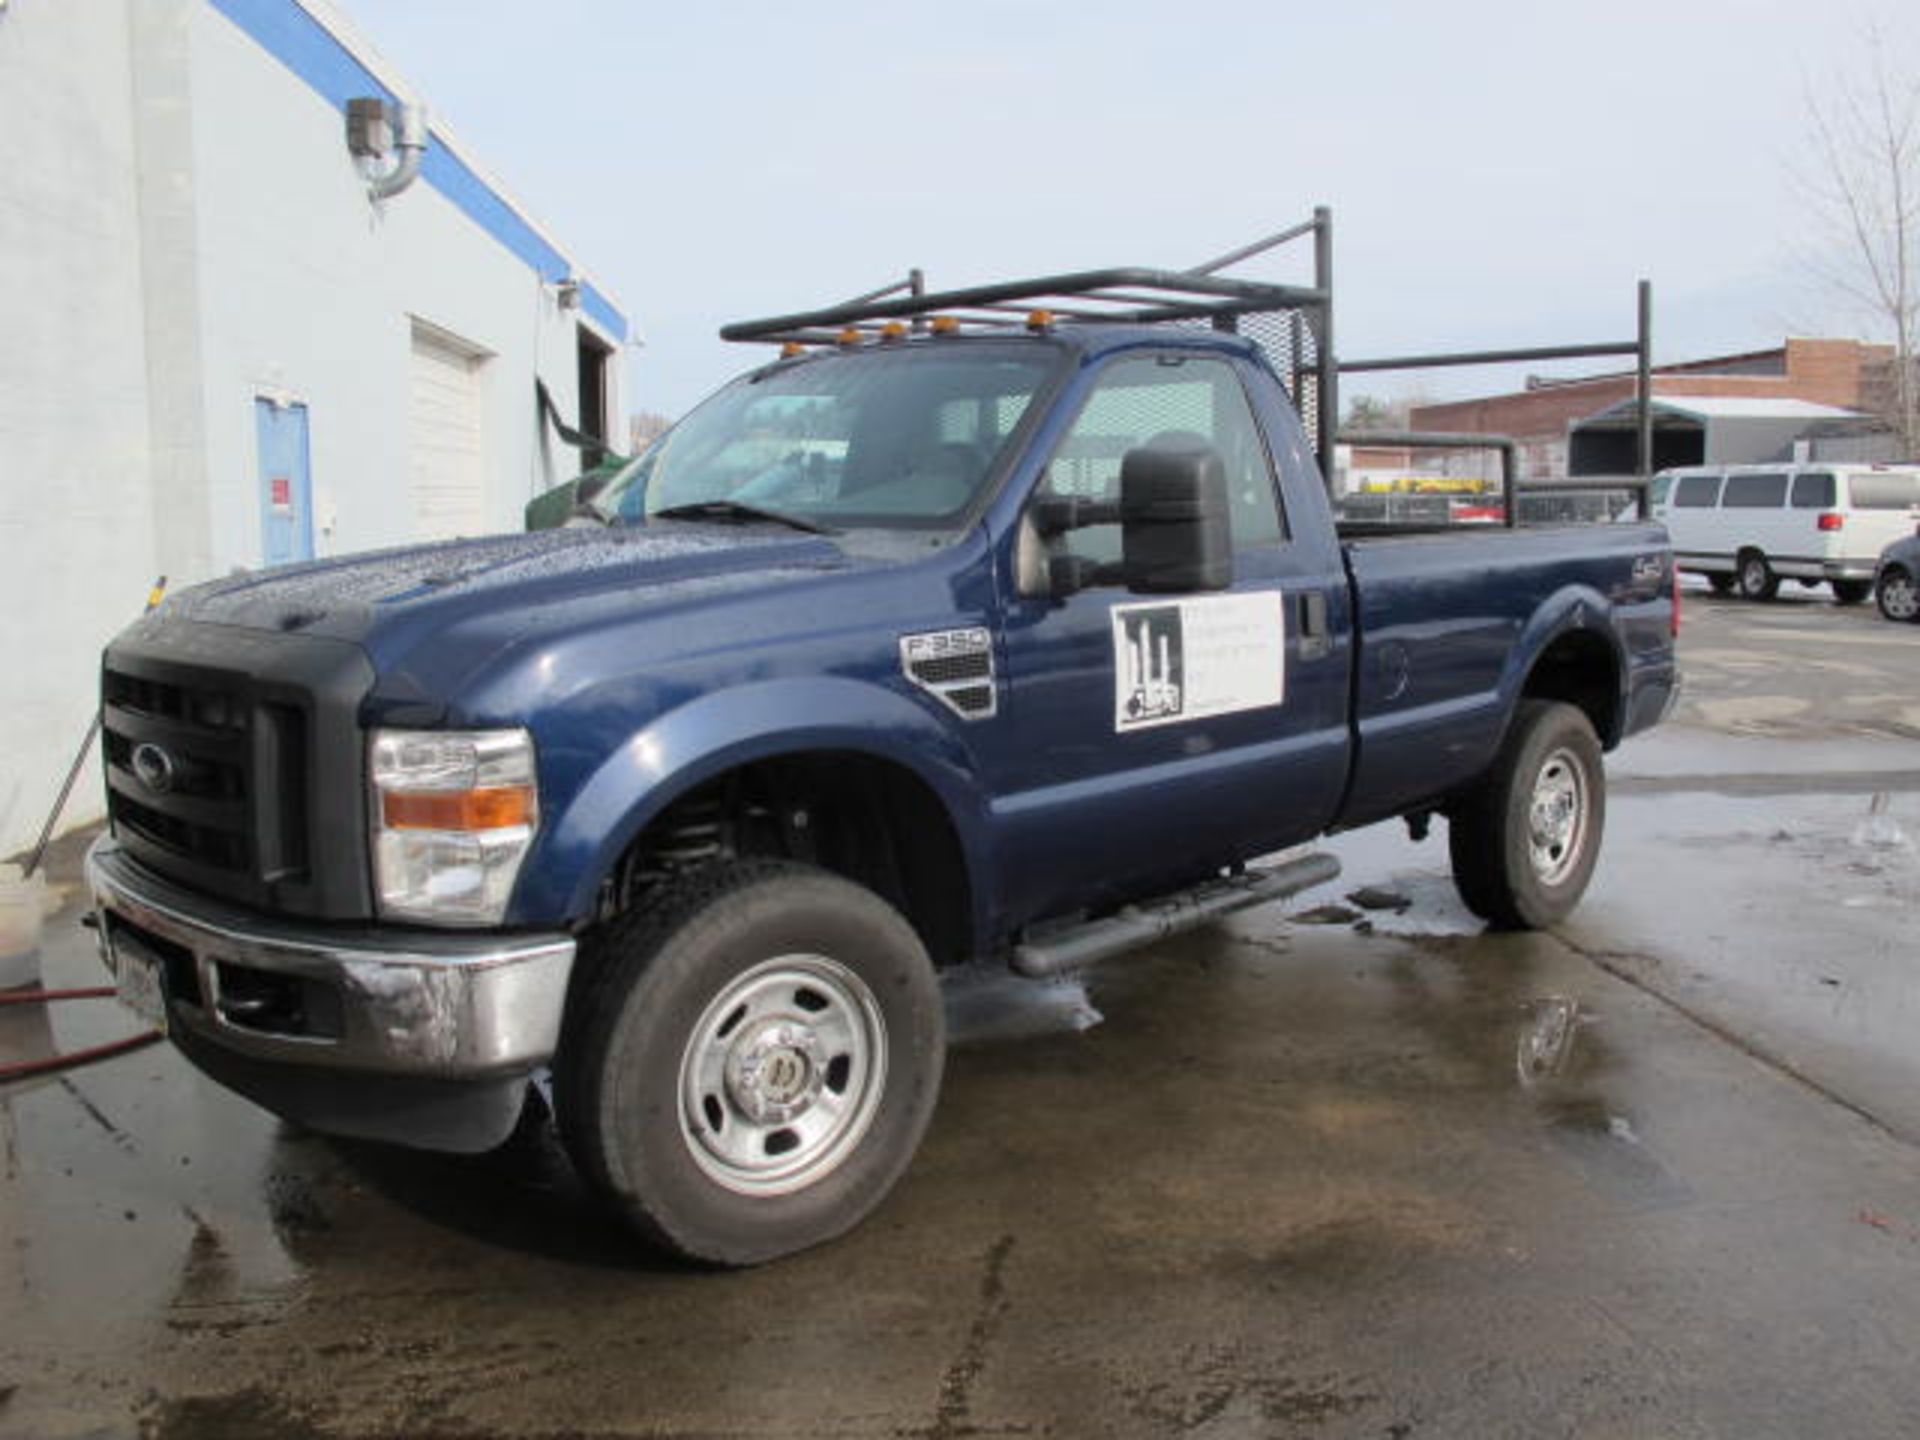 2010 Ford F350 Super Duty Pickup Truck, VIN: 1FTWF3B56AEB43638, 111,524 Miles, 4WD, 5.6 Liter Gas - Image 2 of 7